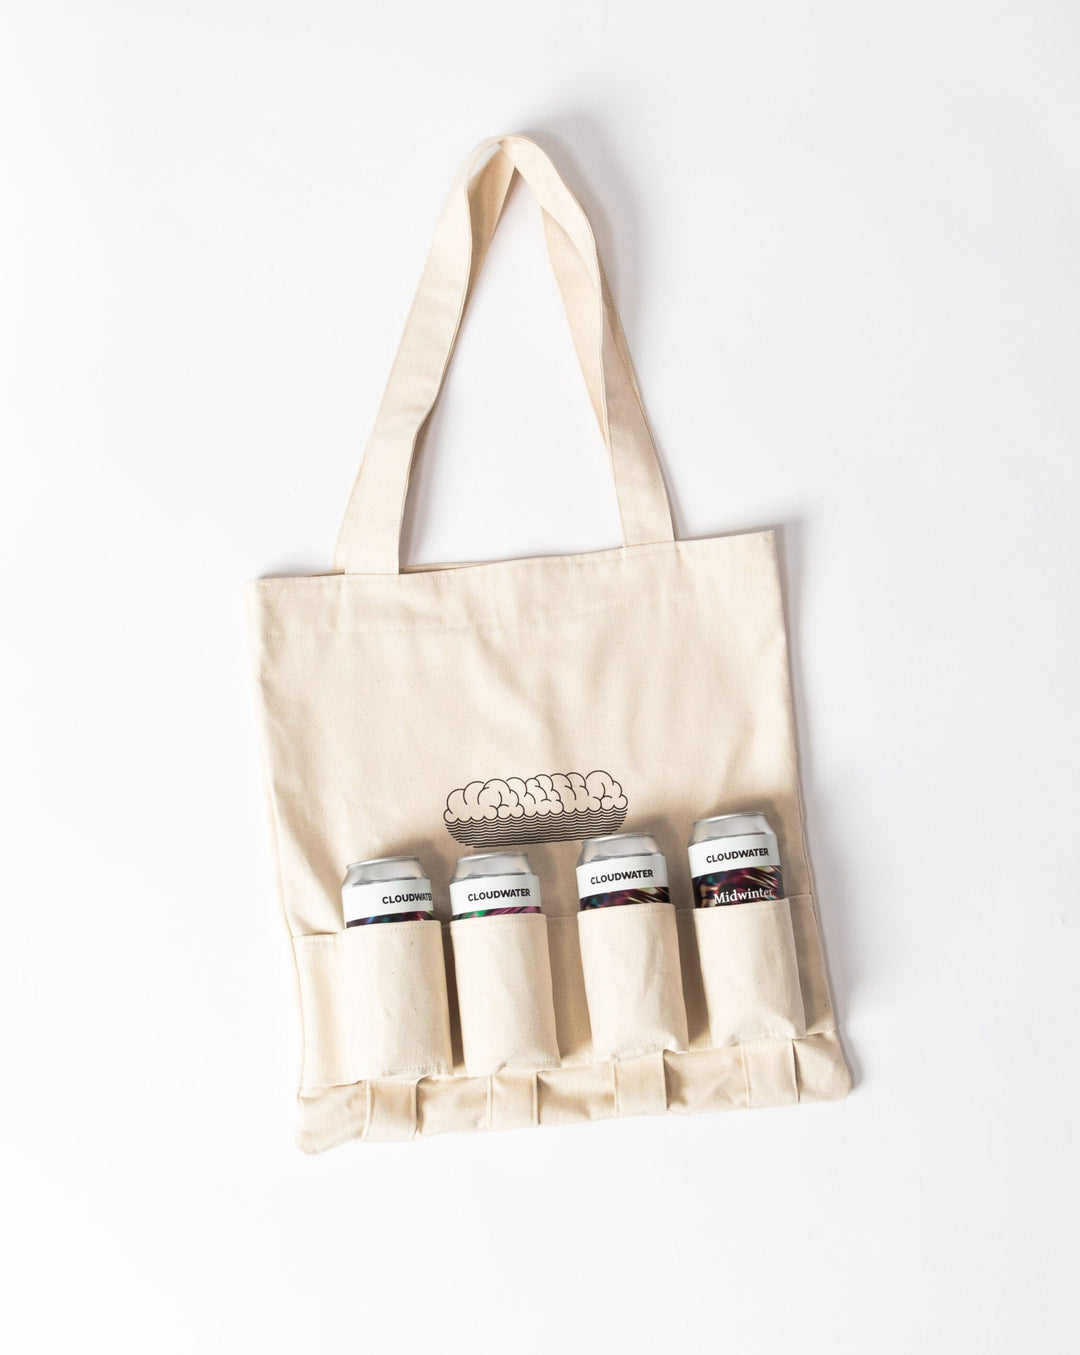 WAWWA x Cloudwater Beer Holder Tote